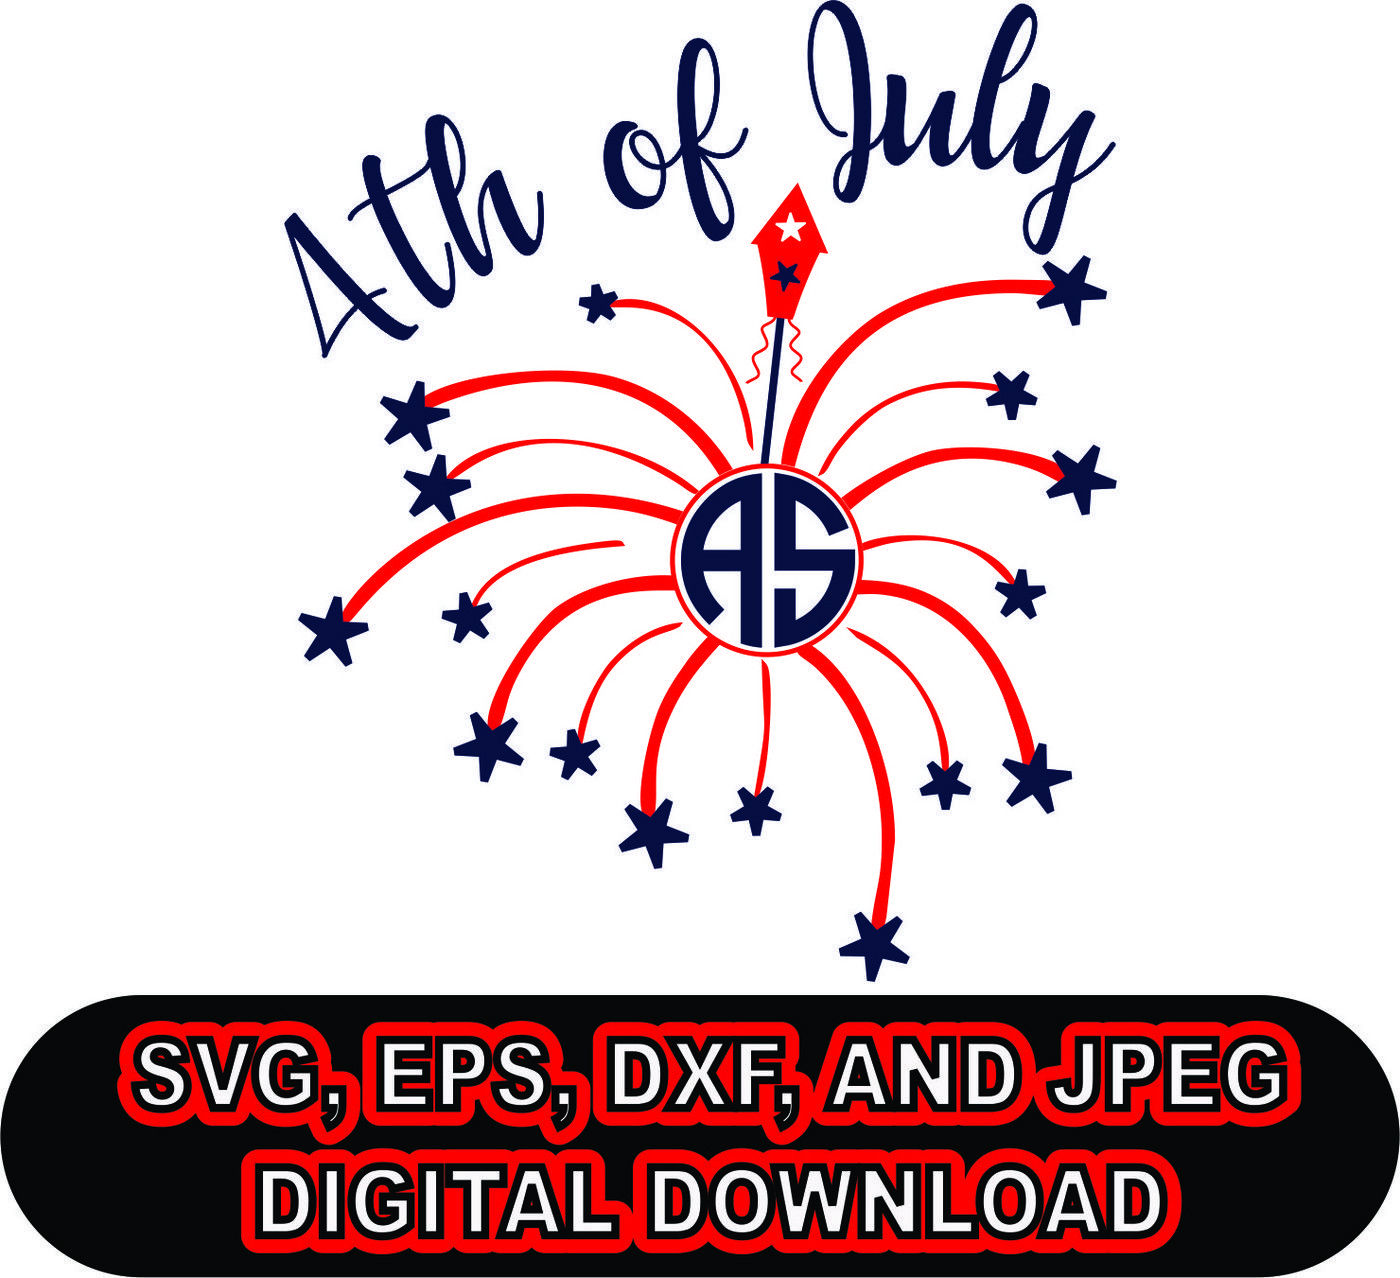 ori 75996 9371dfe4c598392b6131265eaf8152354c7e9e7e 4th of july svg dxf eps and jpg files for cutting machines cameo or cricut july 4th svg america svg patriotic svg